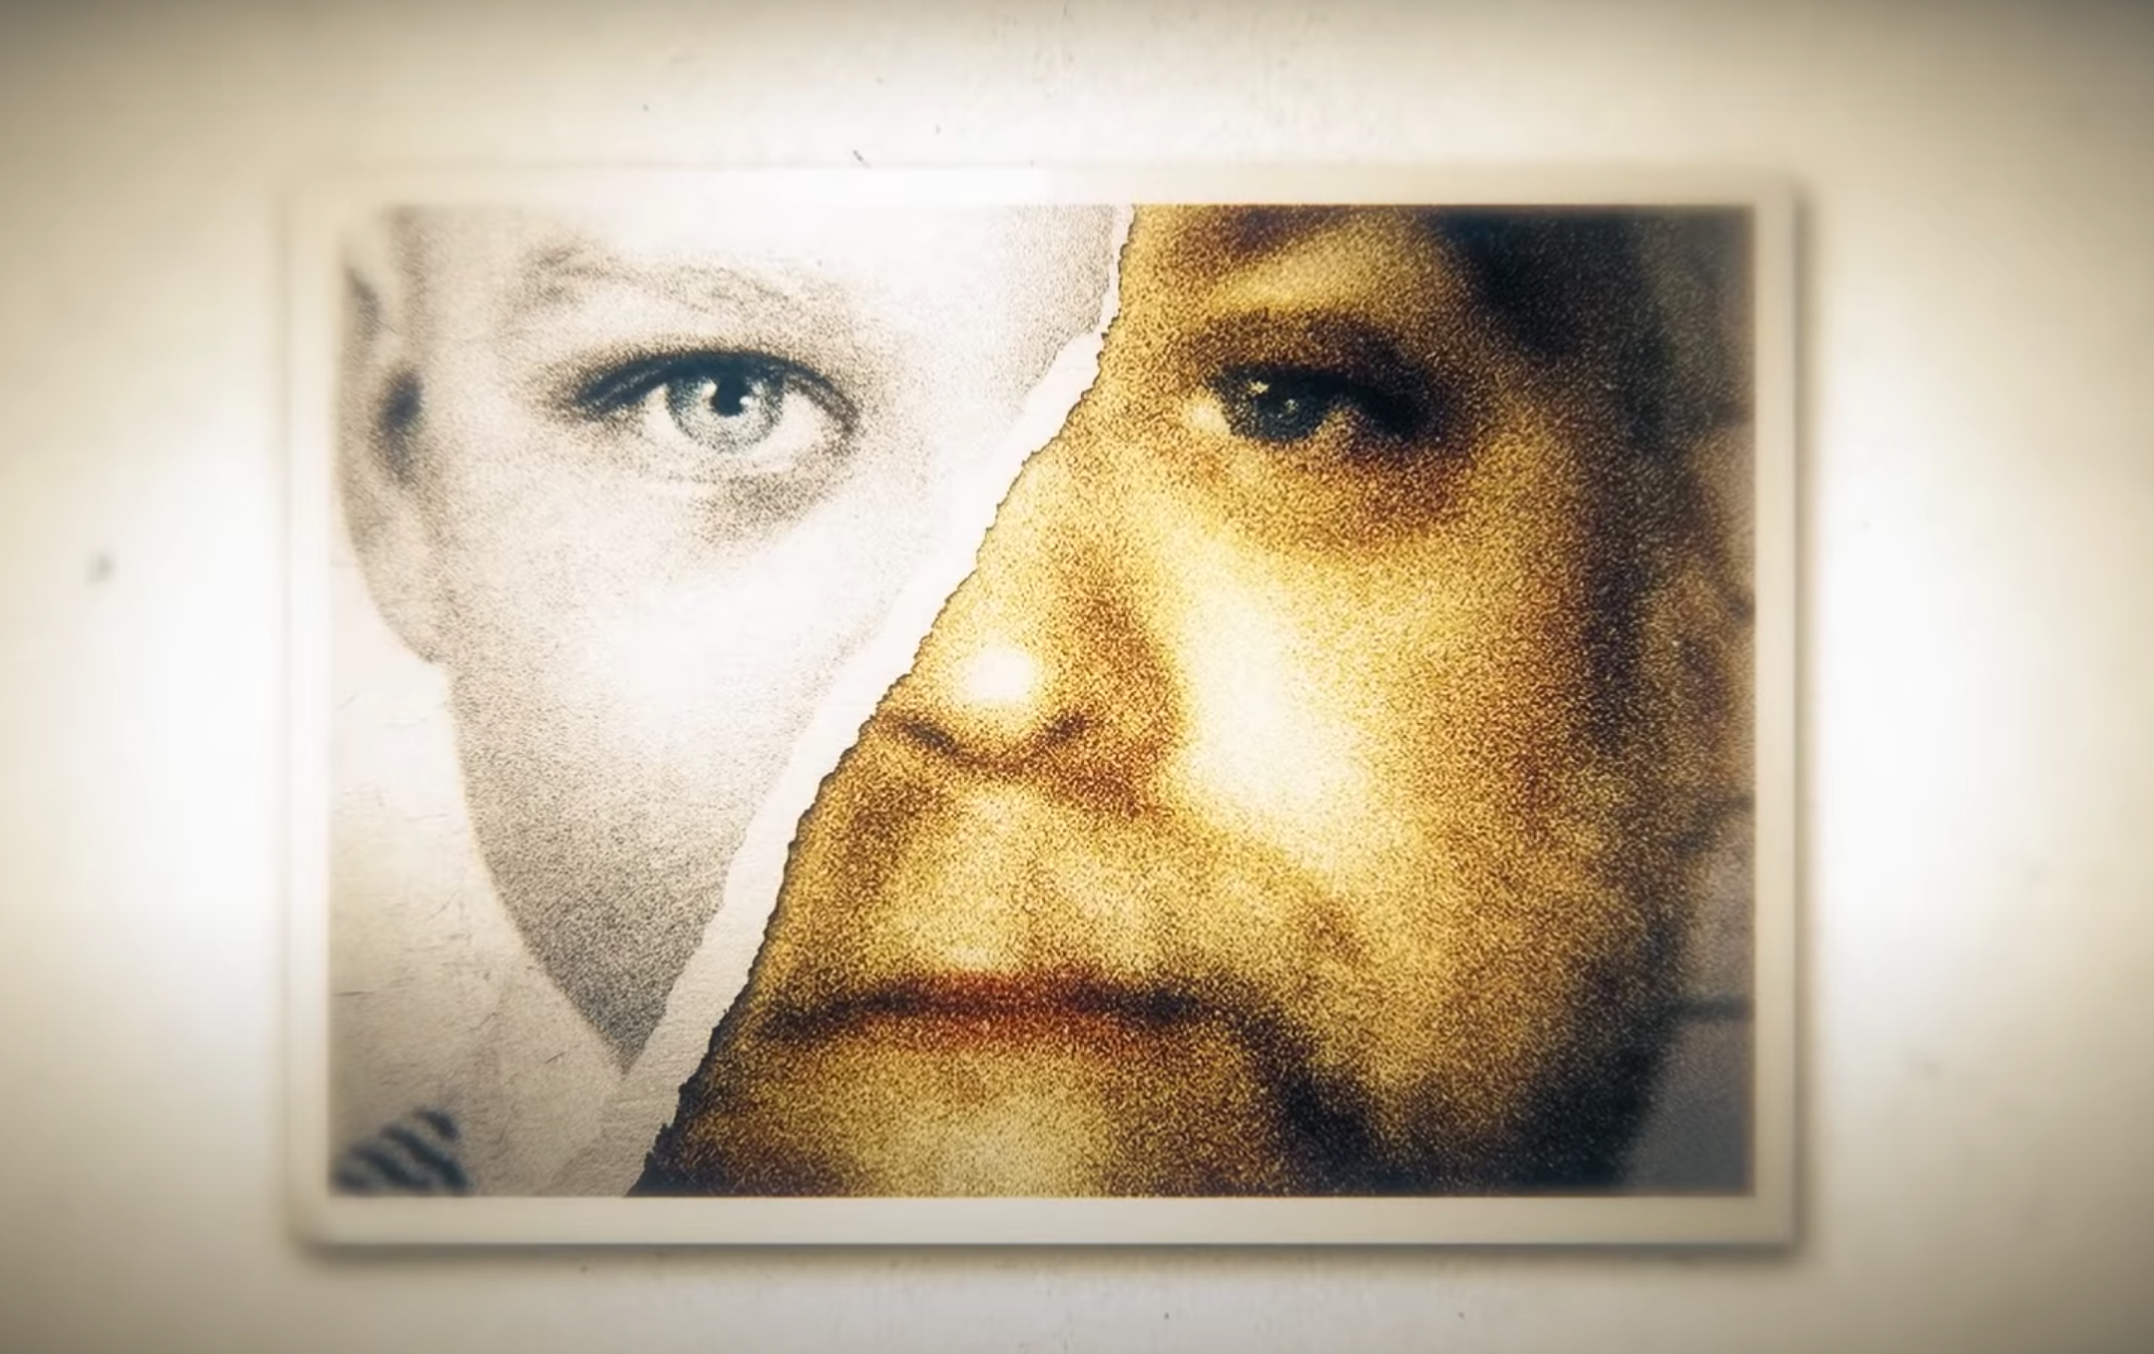 Making a Murderer screenshot combining a child's face and the face of accused murderer Steven Avery